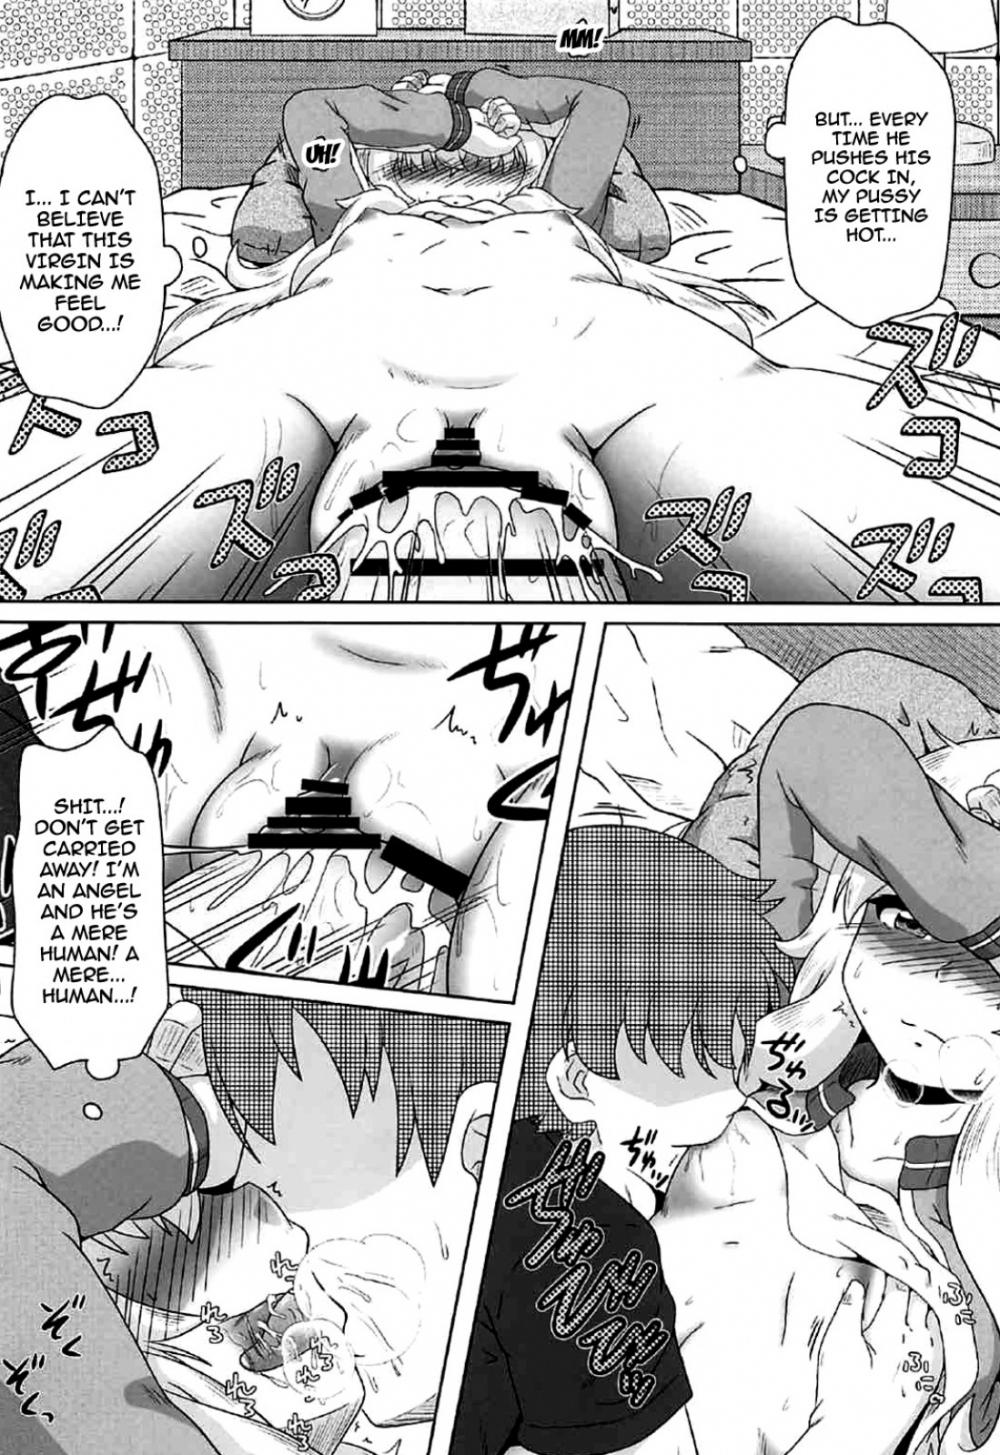 Devil and Angel Both Working At a Sex Brothel-Read-Hentai Manga Hentai Comic